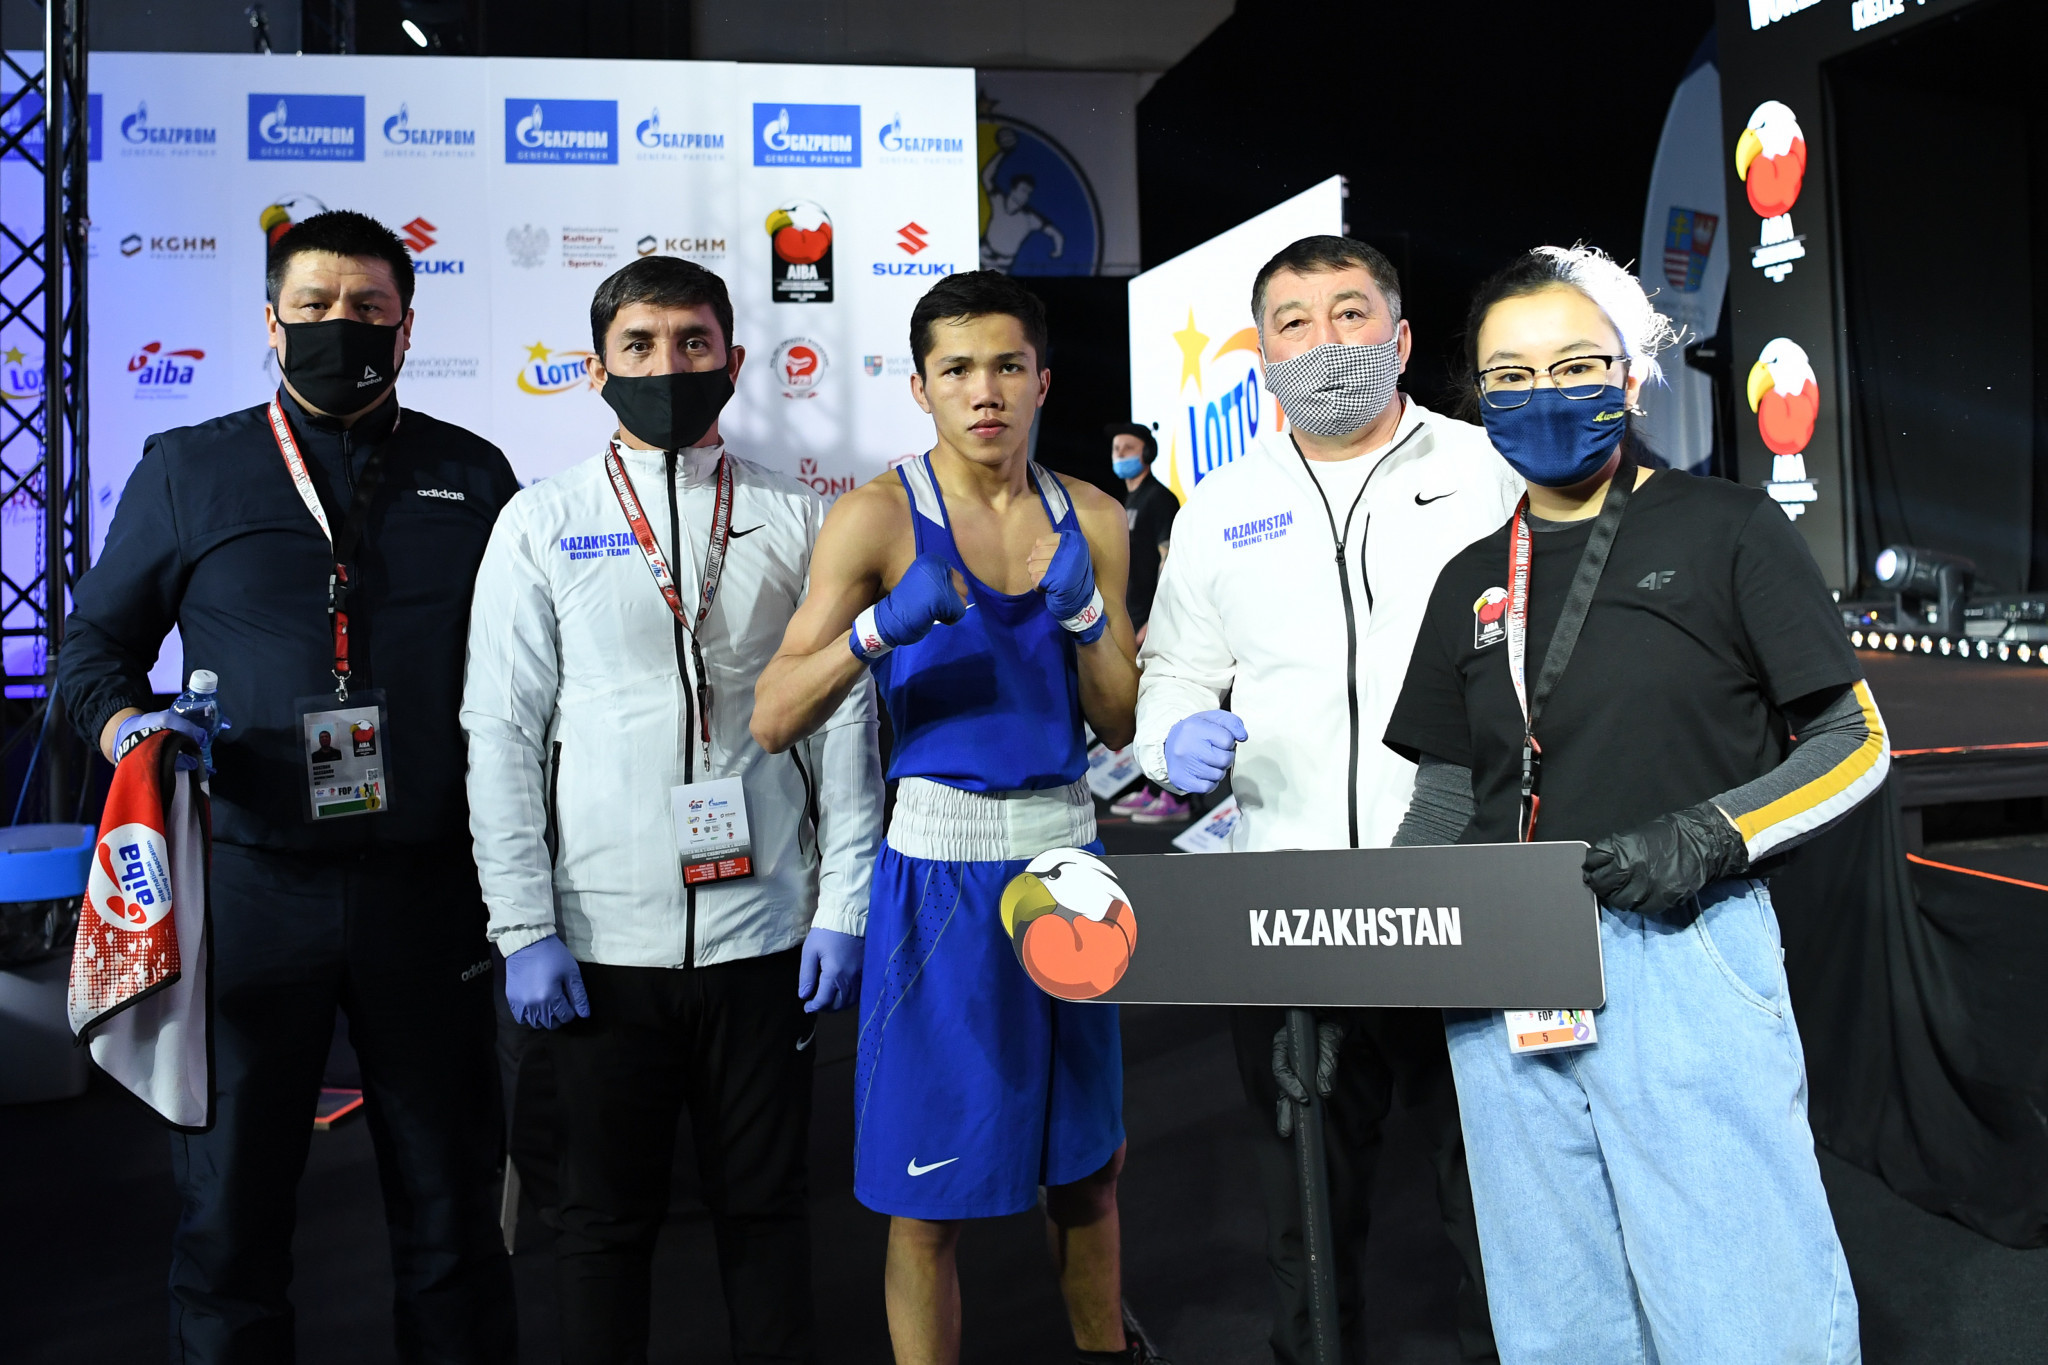 A boxer from Kazakhstan poses for a photo with his team ©AIBA